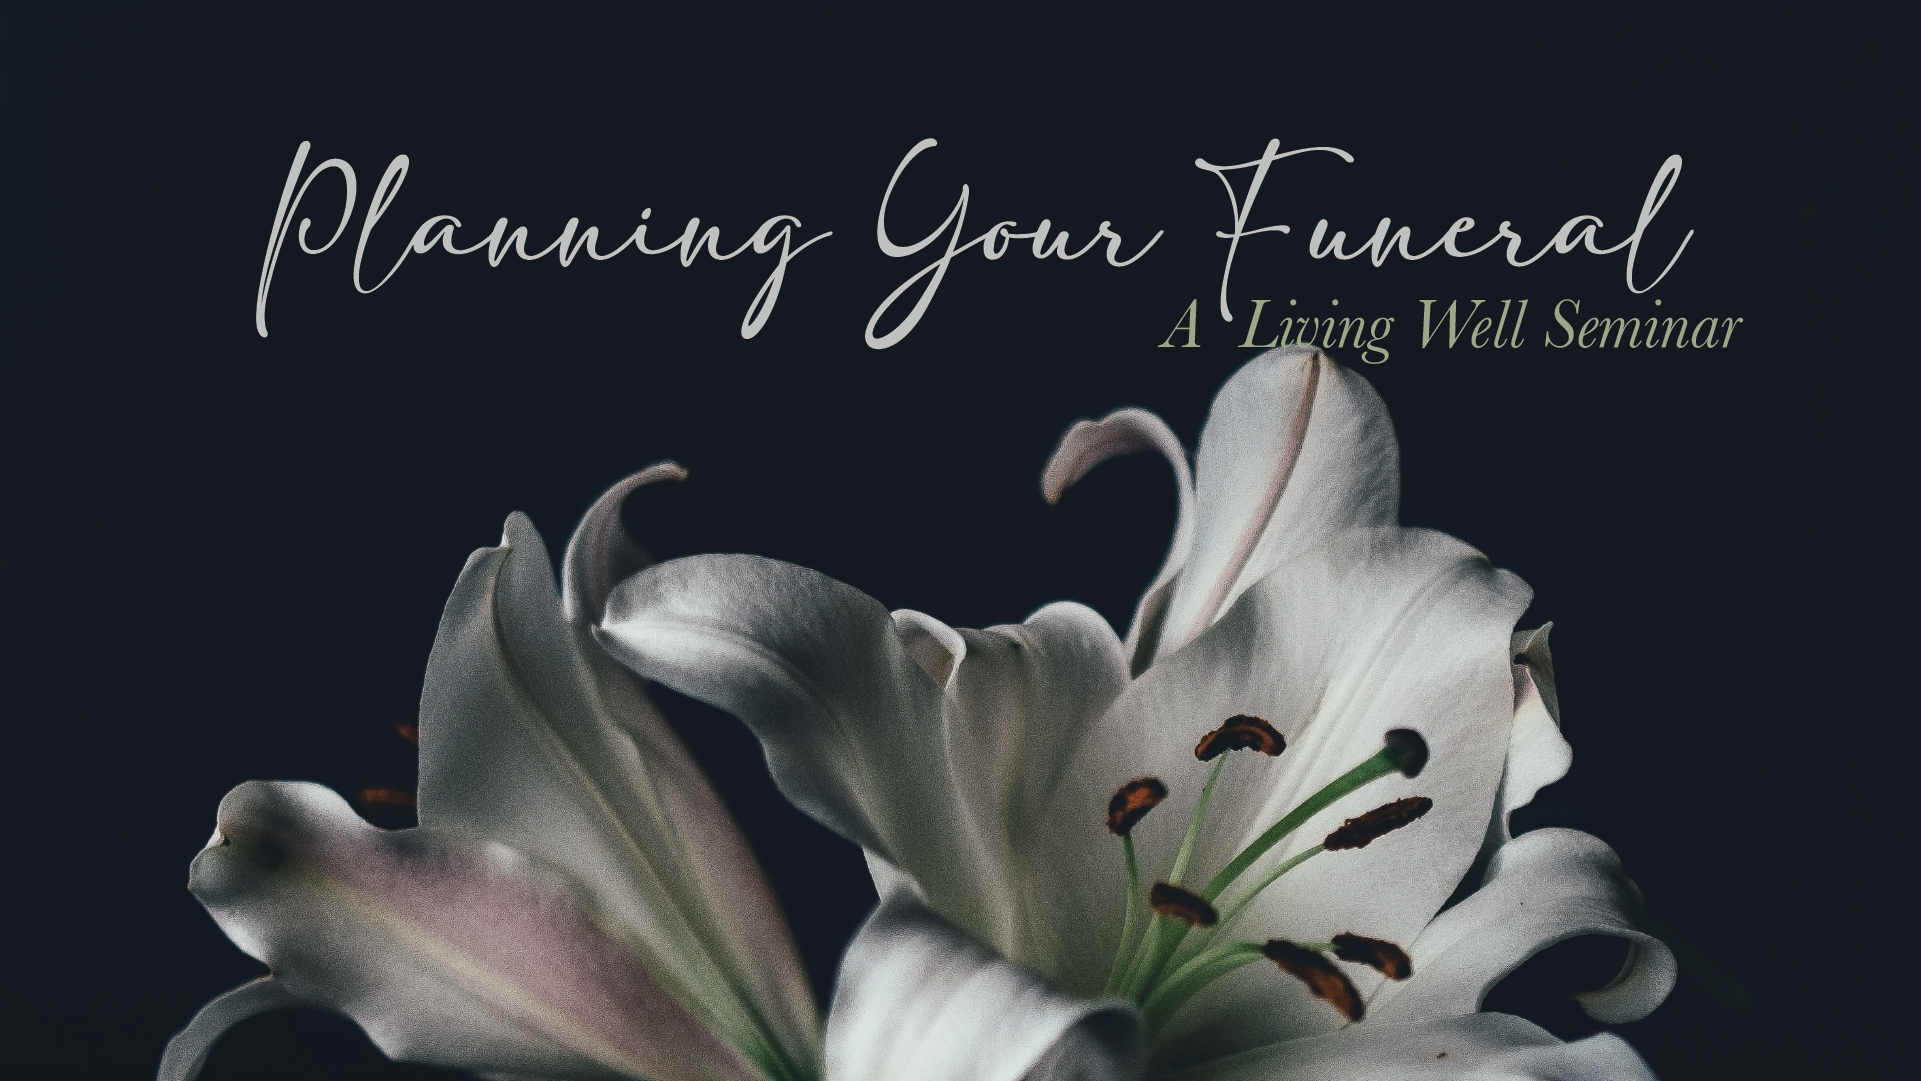 Planning Your Funeral: The Service